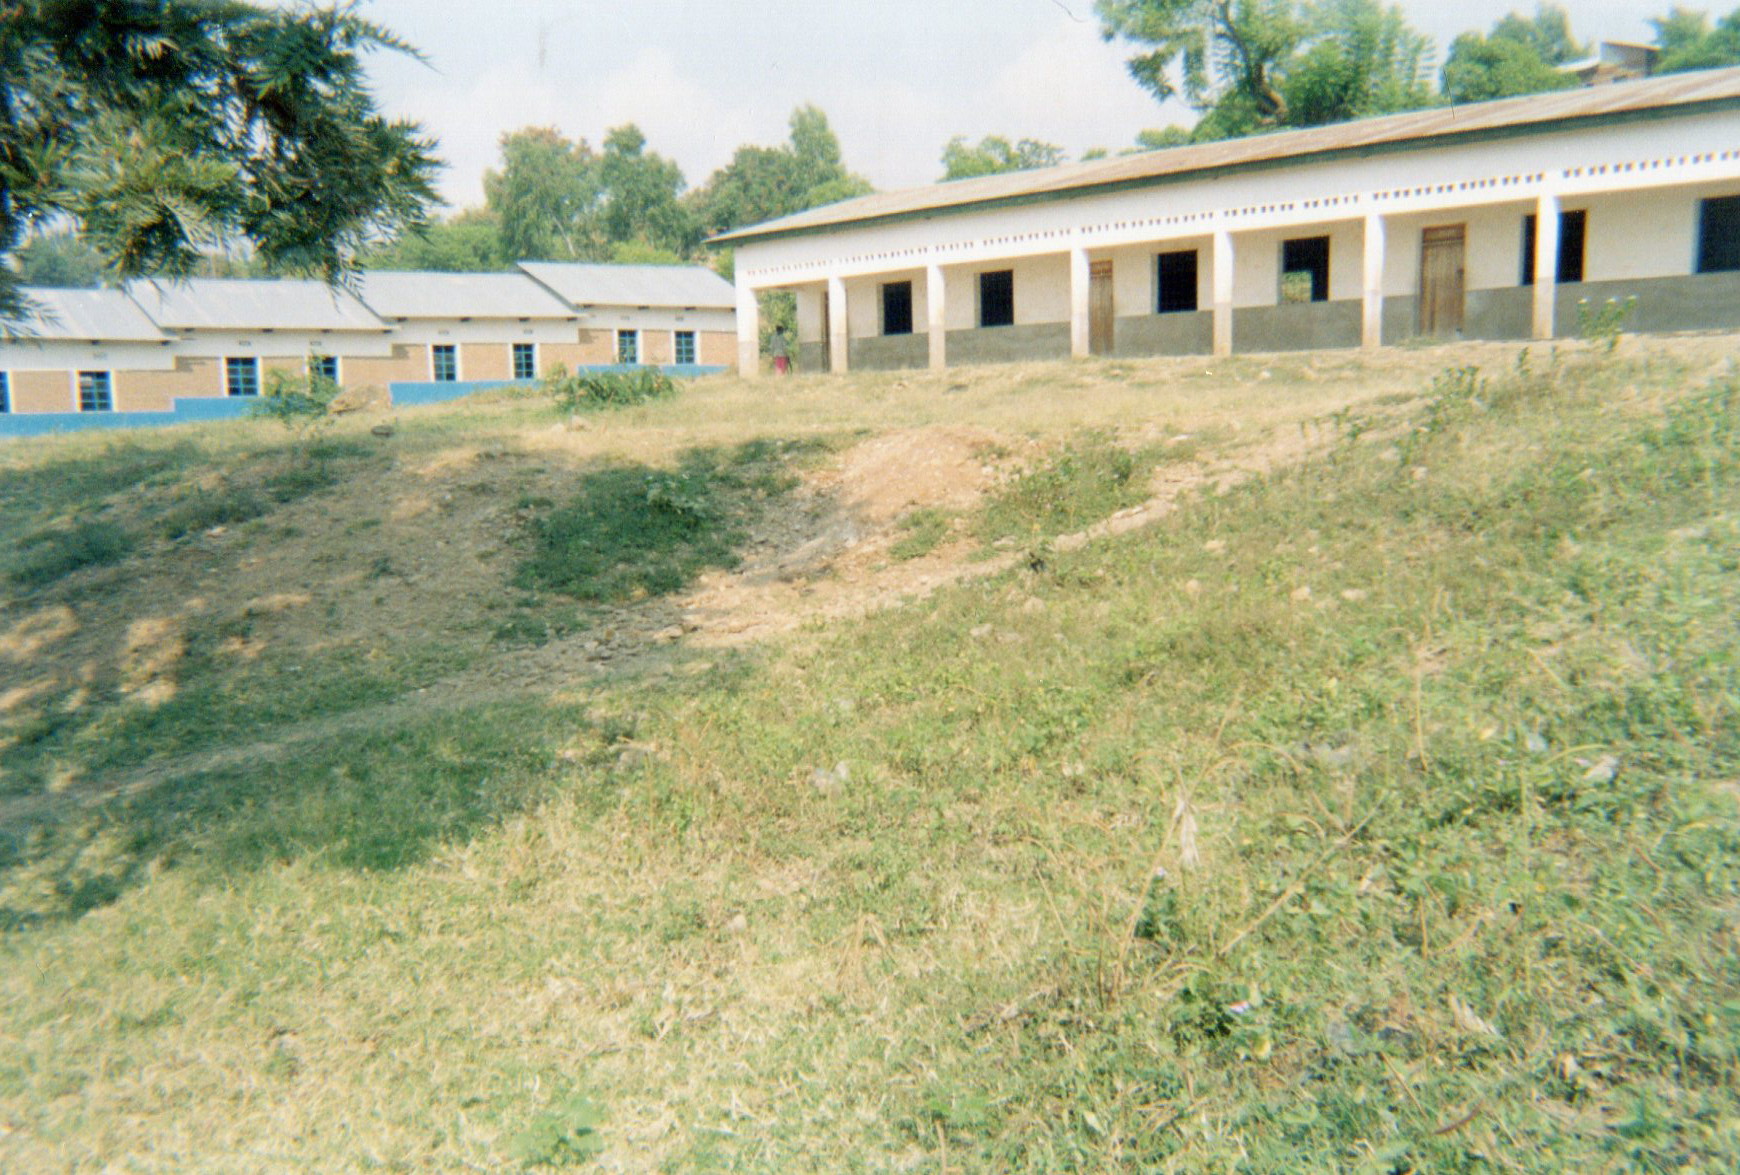  This photo shows the school where my daughter studied before she re-joined the armed group. After my daughter left the armed group, she did not go back to school because she was older and also we didn't have enough money to pay the school fees and o